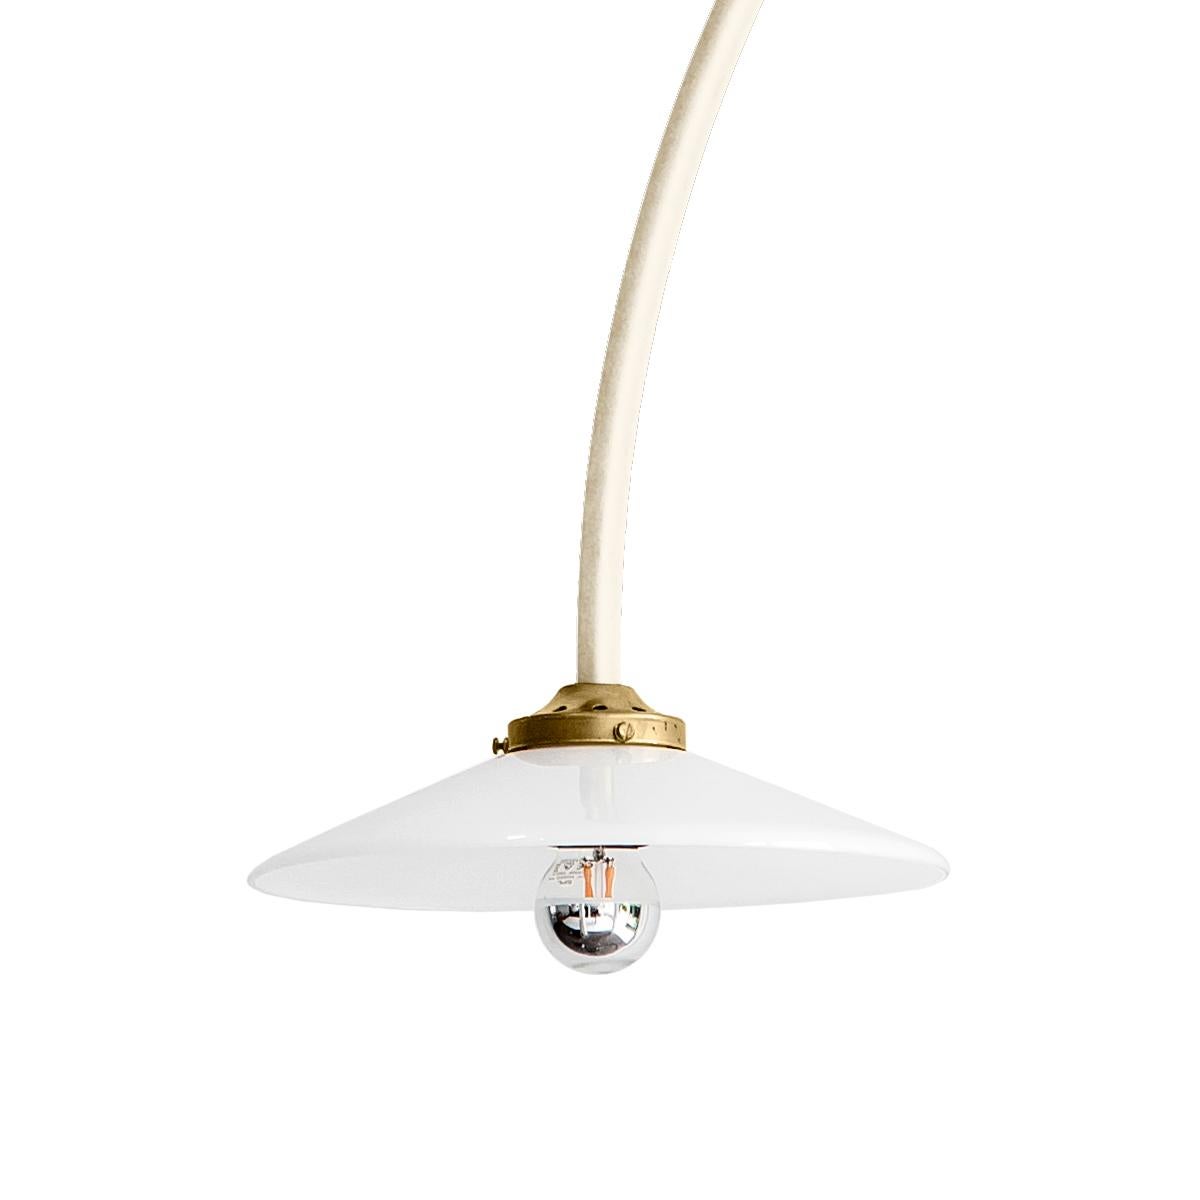 Hanging Lamp N°3 by Muller Van Severen x Valerie Objects

Dimensions: L. 138 W. 25 H. 135 CM
Finish: Ivory

Specifications:
— light source: 4W led
— colour tempertaure: K2700 
— lumen 350
— IP rating 20
— dimmable

Material: 
— lamp frame in steel